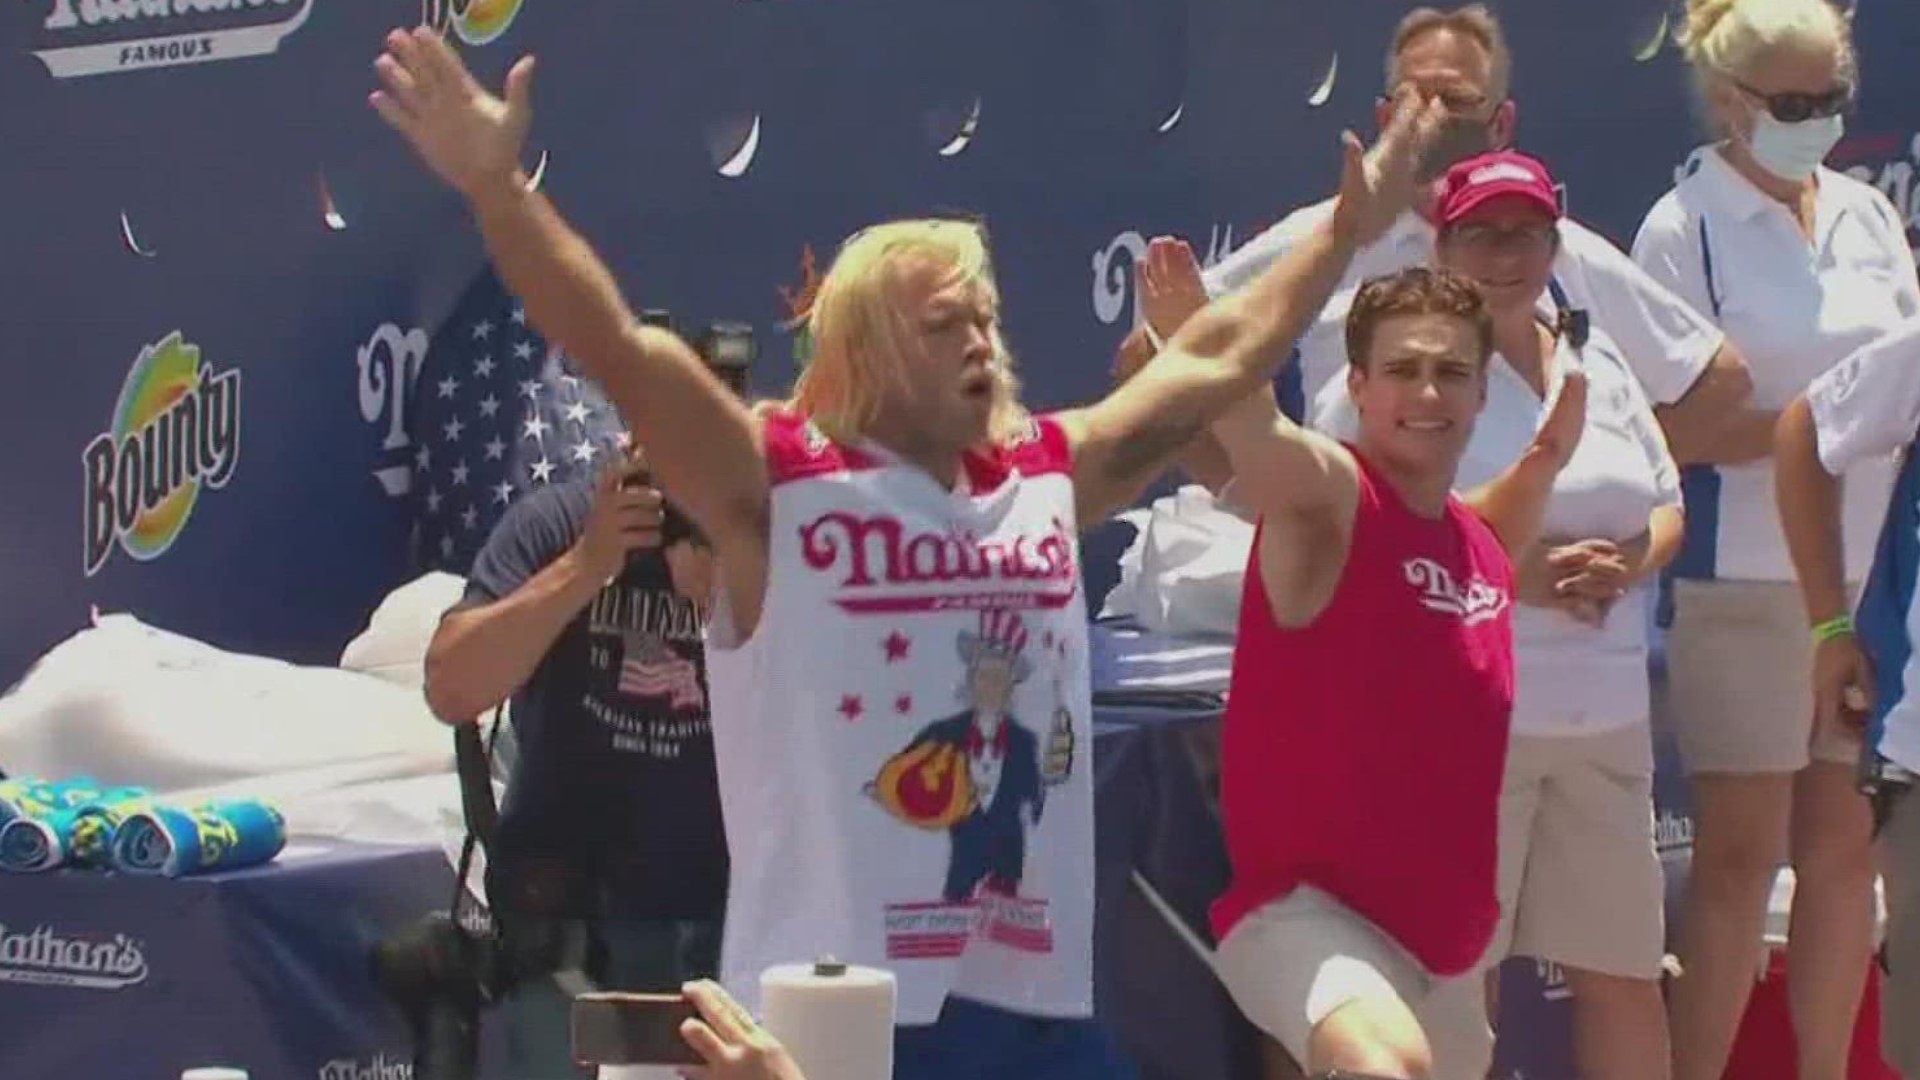 Hartman is ranked 20th on a list that includes the world's No. 1, Joey Chestnut. The winners of the men's and women's July 4 contests will each win $20,000.